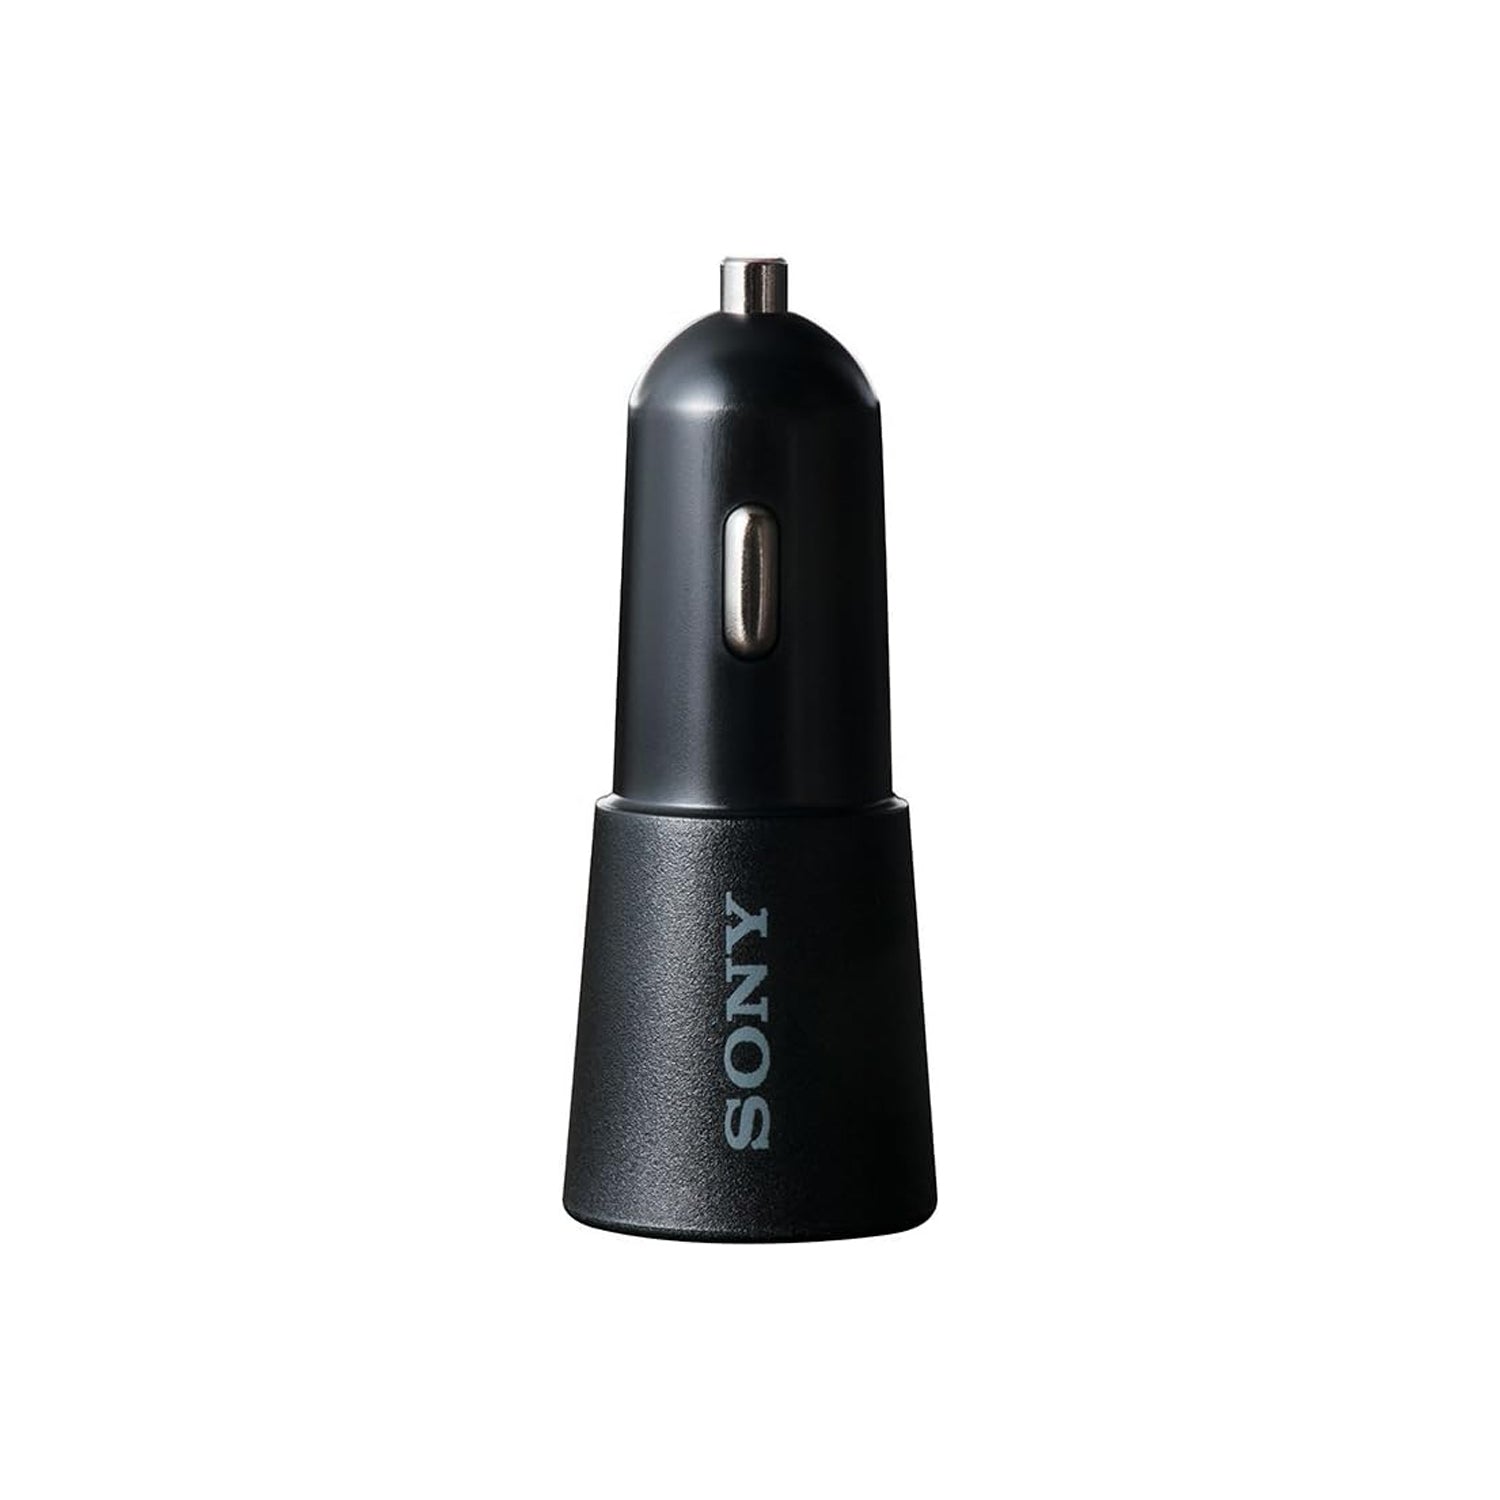 Sony CP-CADM2 Fast Charging In-Car USB Charger with 2 Ports